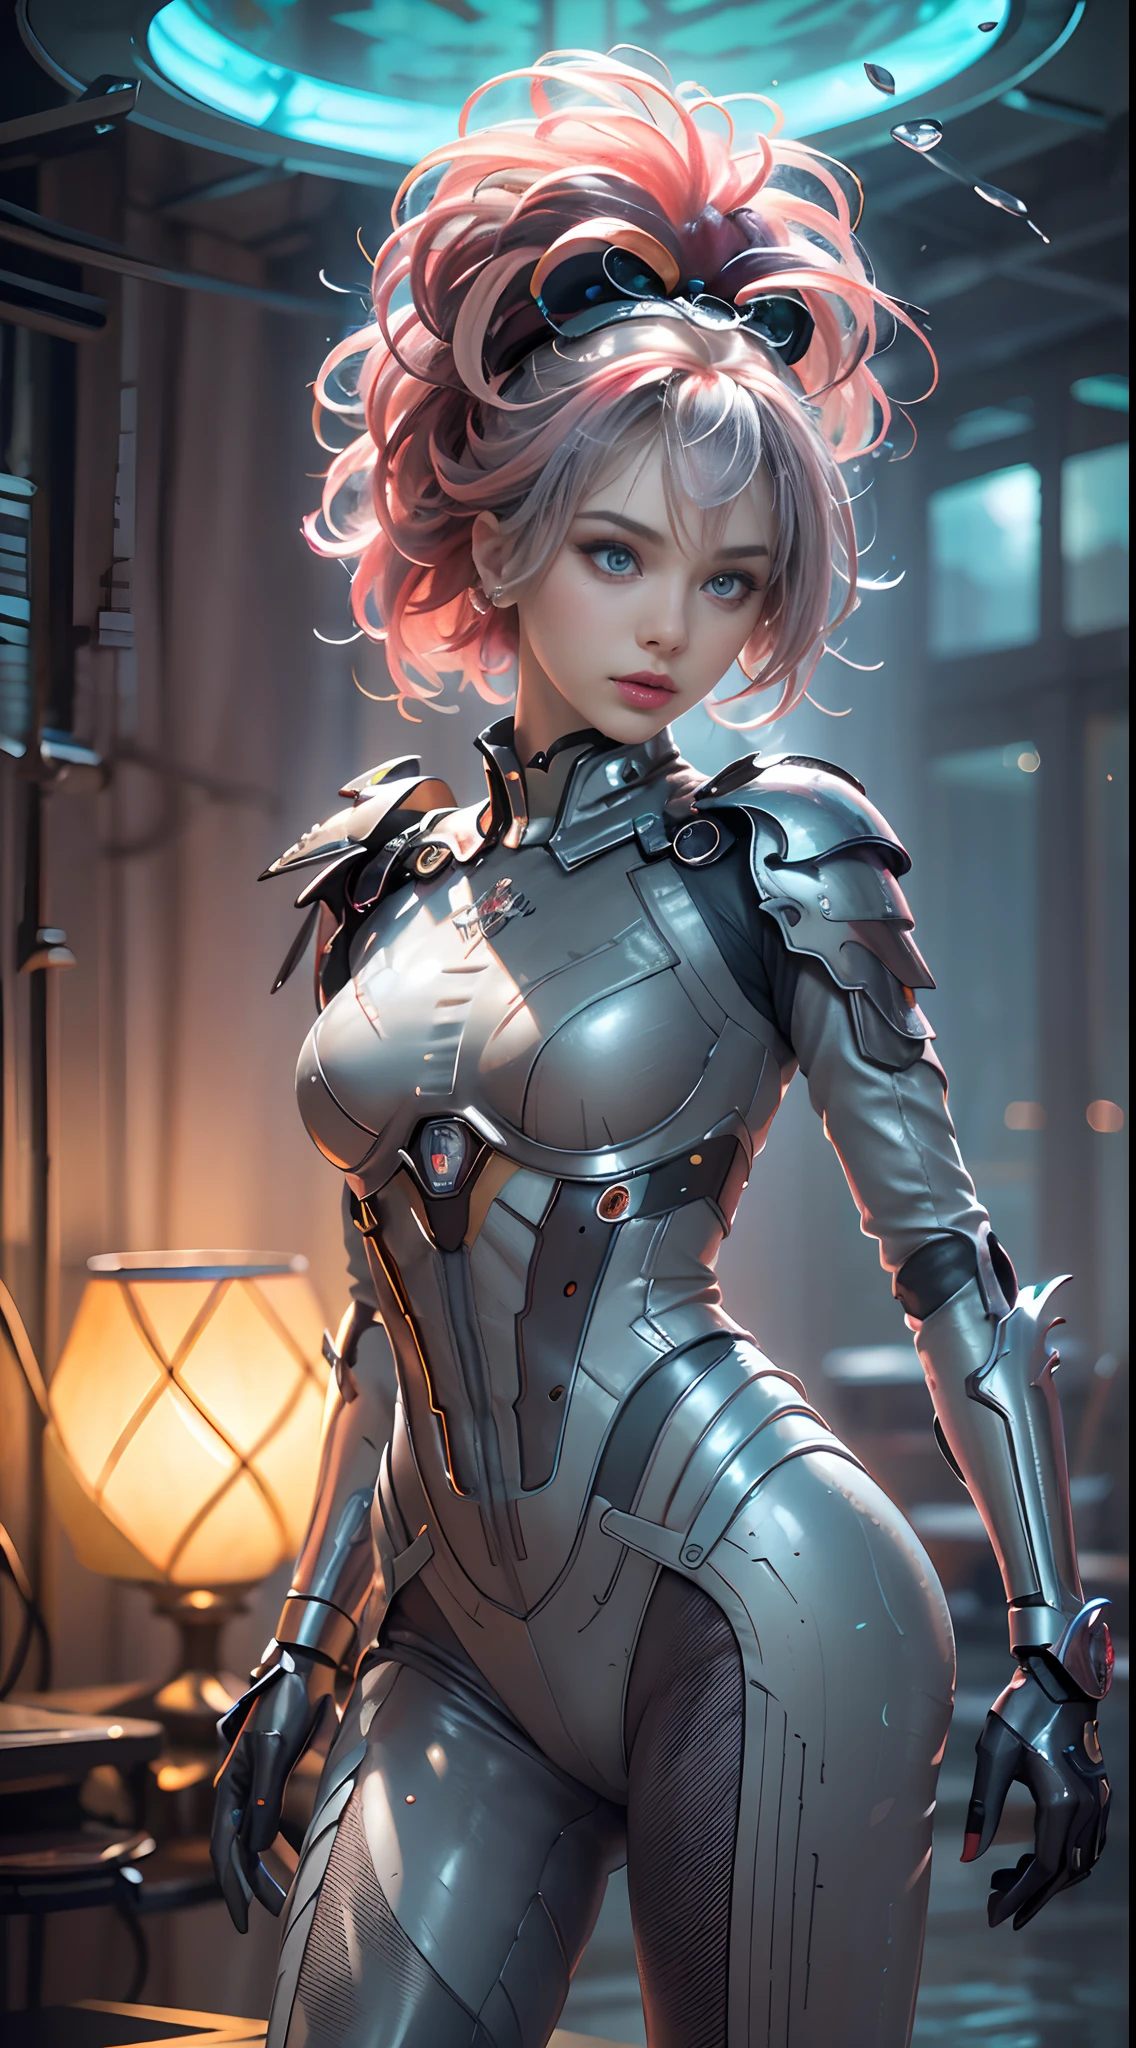 unreal engine:1.4,UHD,La Best Quality:1.4, photorealistic:1.4, skin texture:1.4, Masterpiece:1.8,first work, Best Quality, 1girl,( Ives Girl:1.4), mecha, beautiful  lighting, (neon light: 1.2), (evening: 1.5), "first work, Best Quality, 1chica, Full length portrait, pose sensual, multicolored hair+the payment:1.3+yellow:1.3+red:1.3, Sculpted legs and tempting curves, full breasts, Beautiful face, (many drops of water:1.4), clouds, twilights, Open floor plan, watercolor, neon light:1.2, evening:1.5, mecha, beautiful  lighting, Bright neon light: 1.2, unforgettable mysterious night: 1.5",(hands:1.4),（Beautiful and detailed eye description）